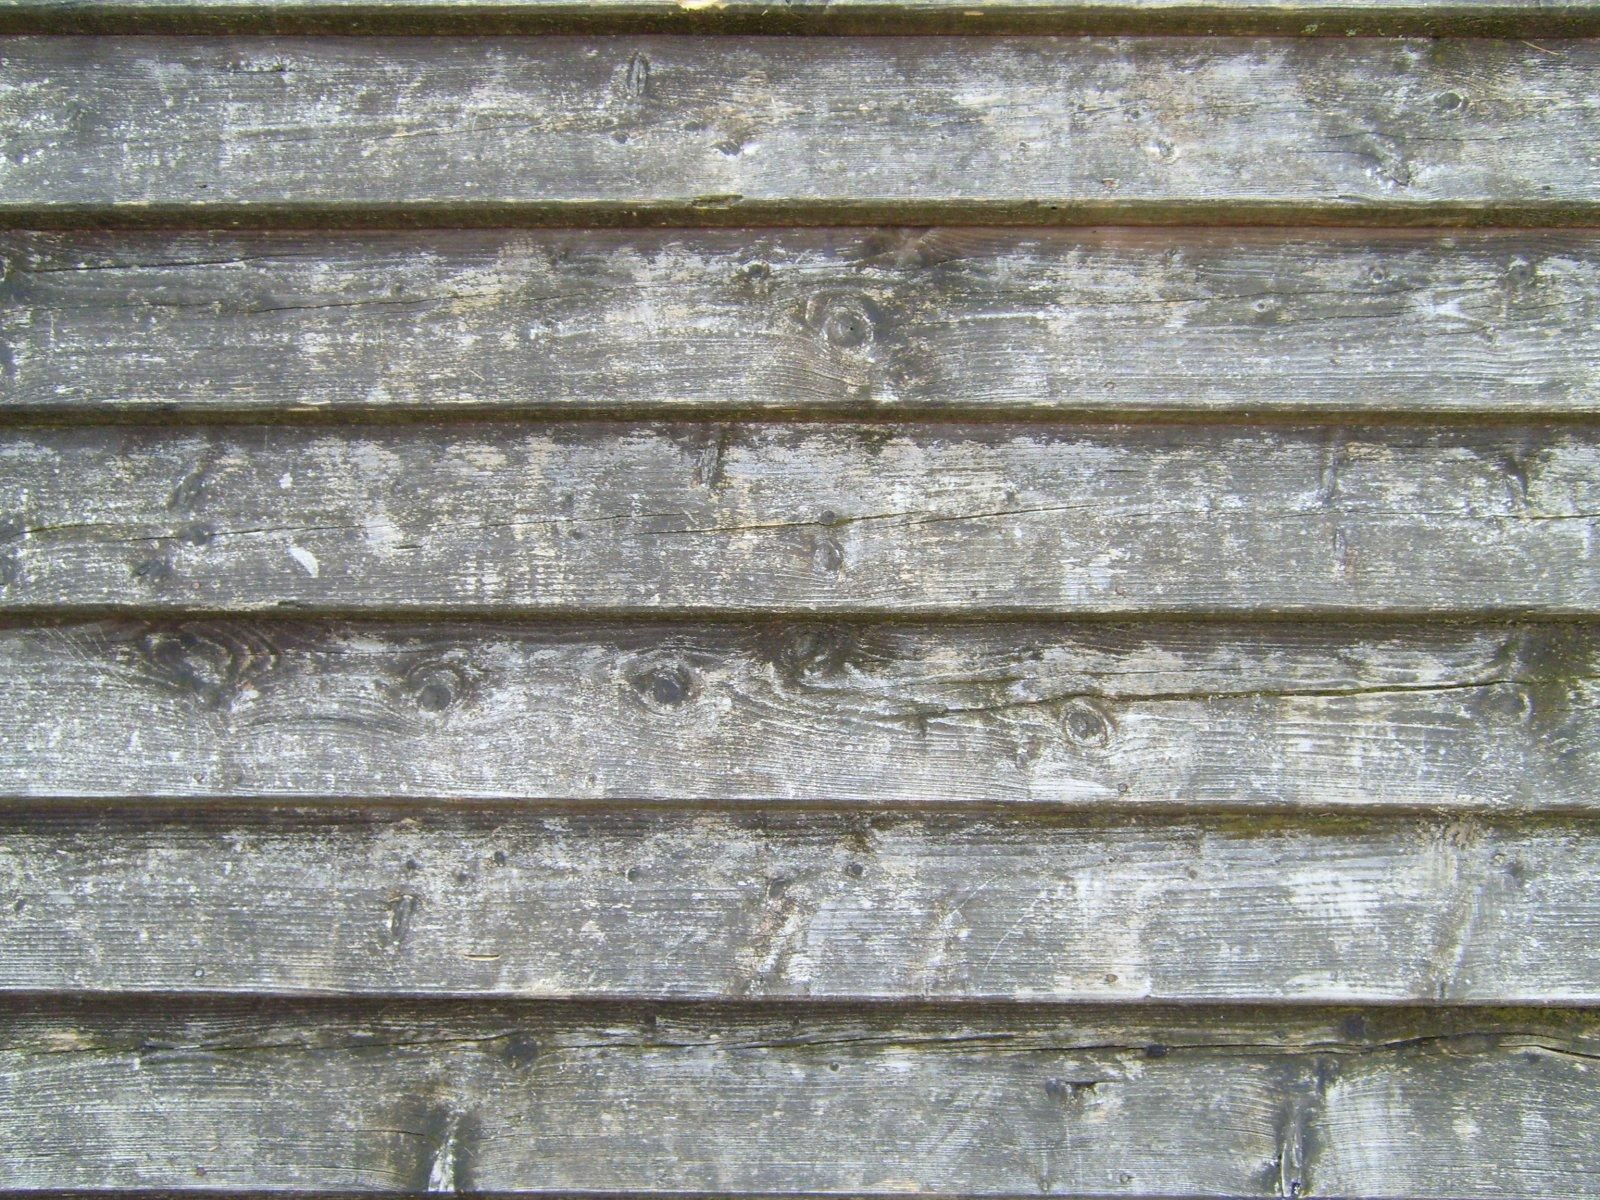 File:Old wood planked wall.jpg - Wikimedia Commons